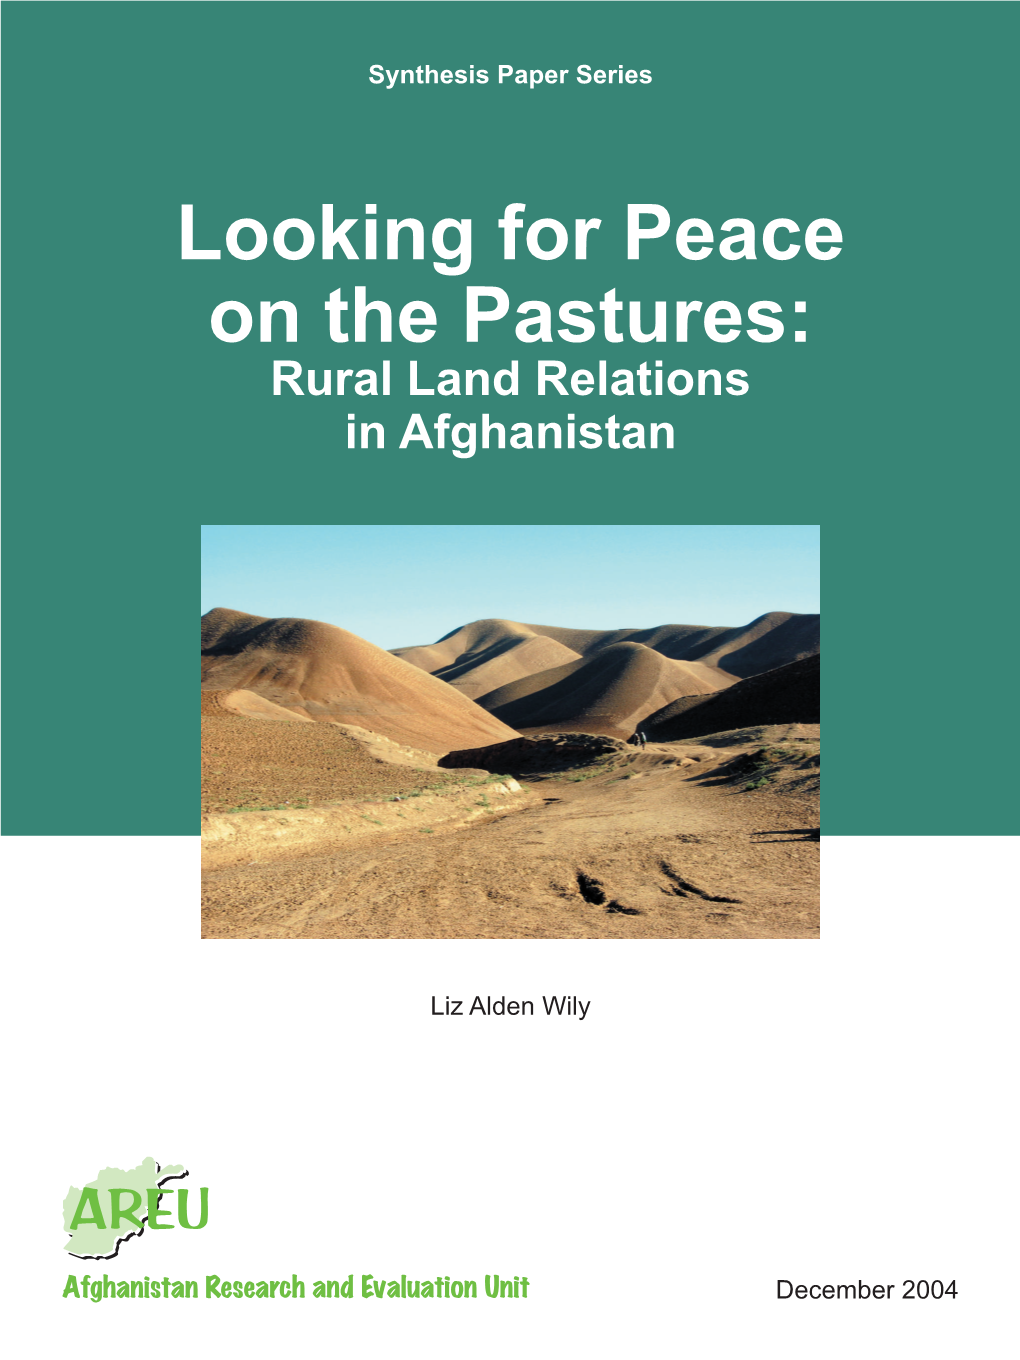 Looking for Peace on the Pastures: Rural Land Relations in Afghanistan